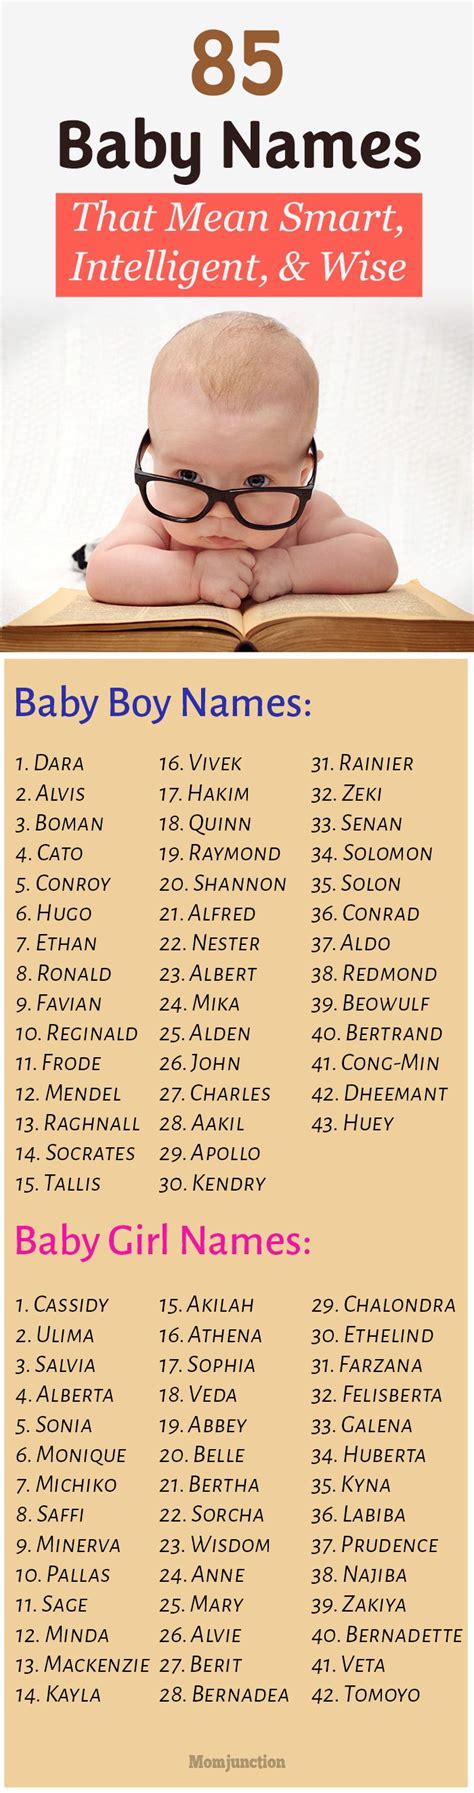 85 Unique Intelligent Wise And Smart Baby Names Baby Girl Names